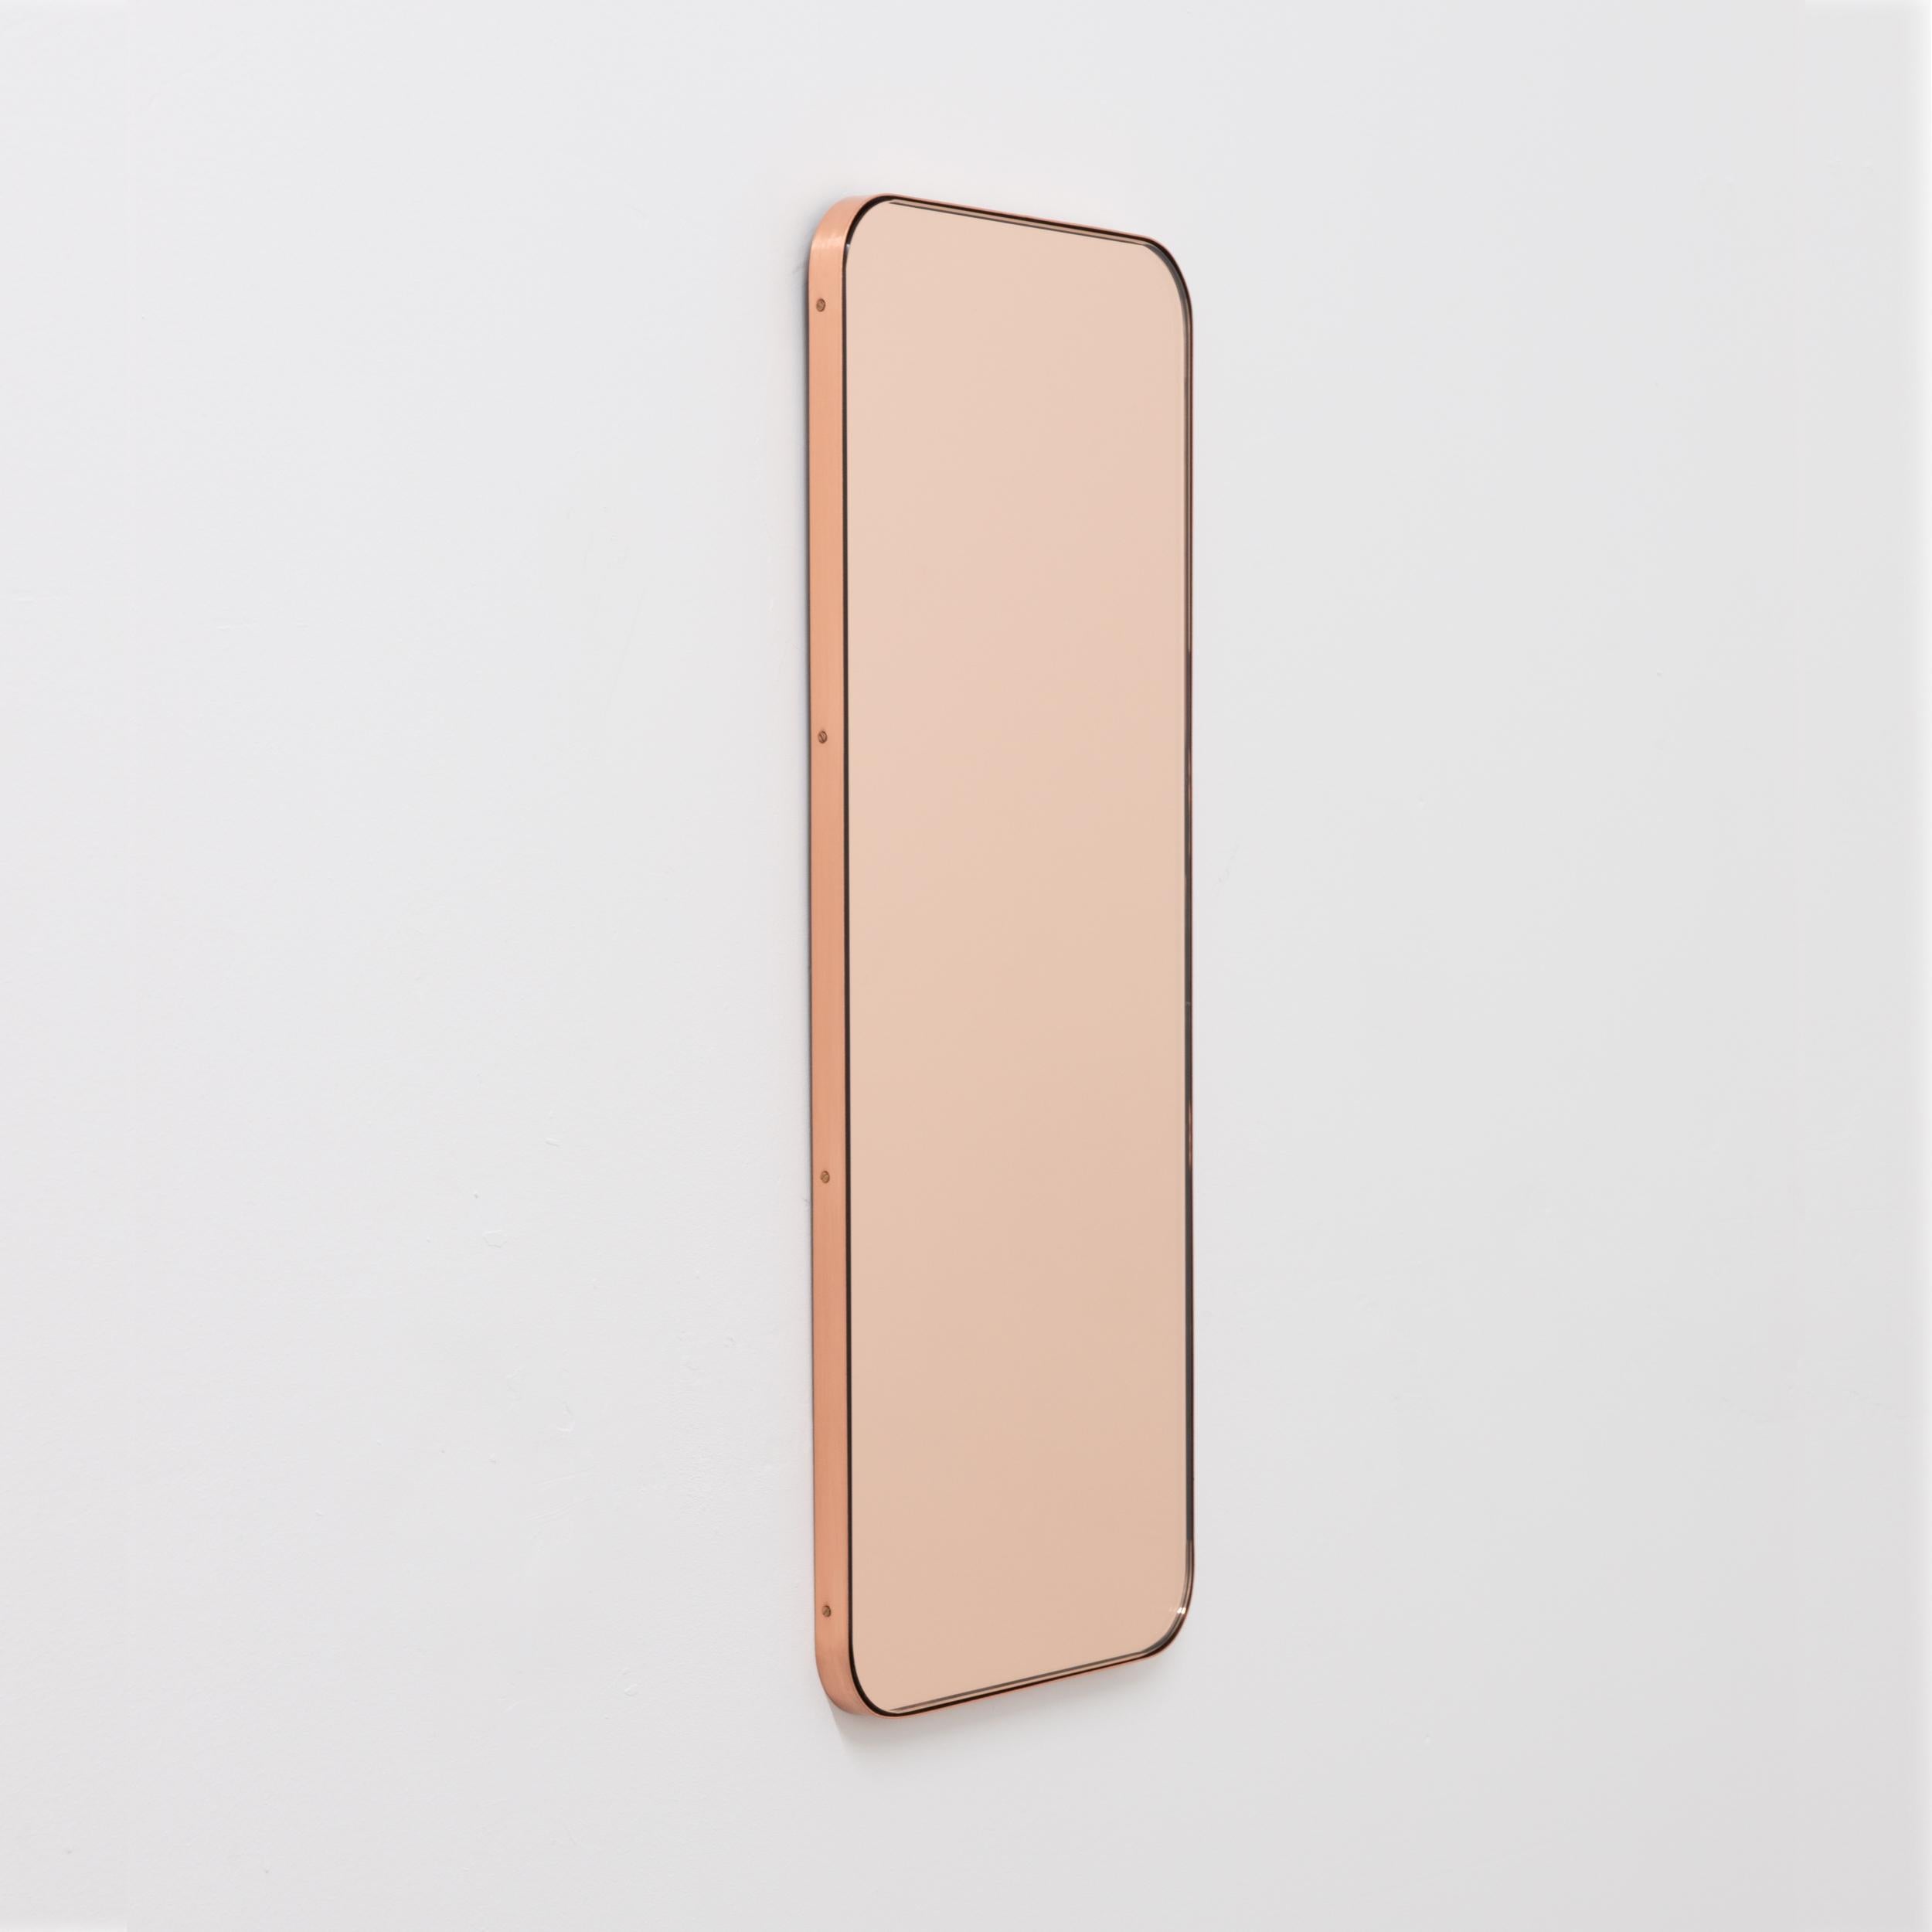 Modern rectangular mirror with a minimalist brushed solid copper frame. The detailing and finish, including visible copper plated screws, emphasise the crafty and quality feel of the mirror, a true signature of our brand. Designed and made in